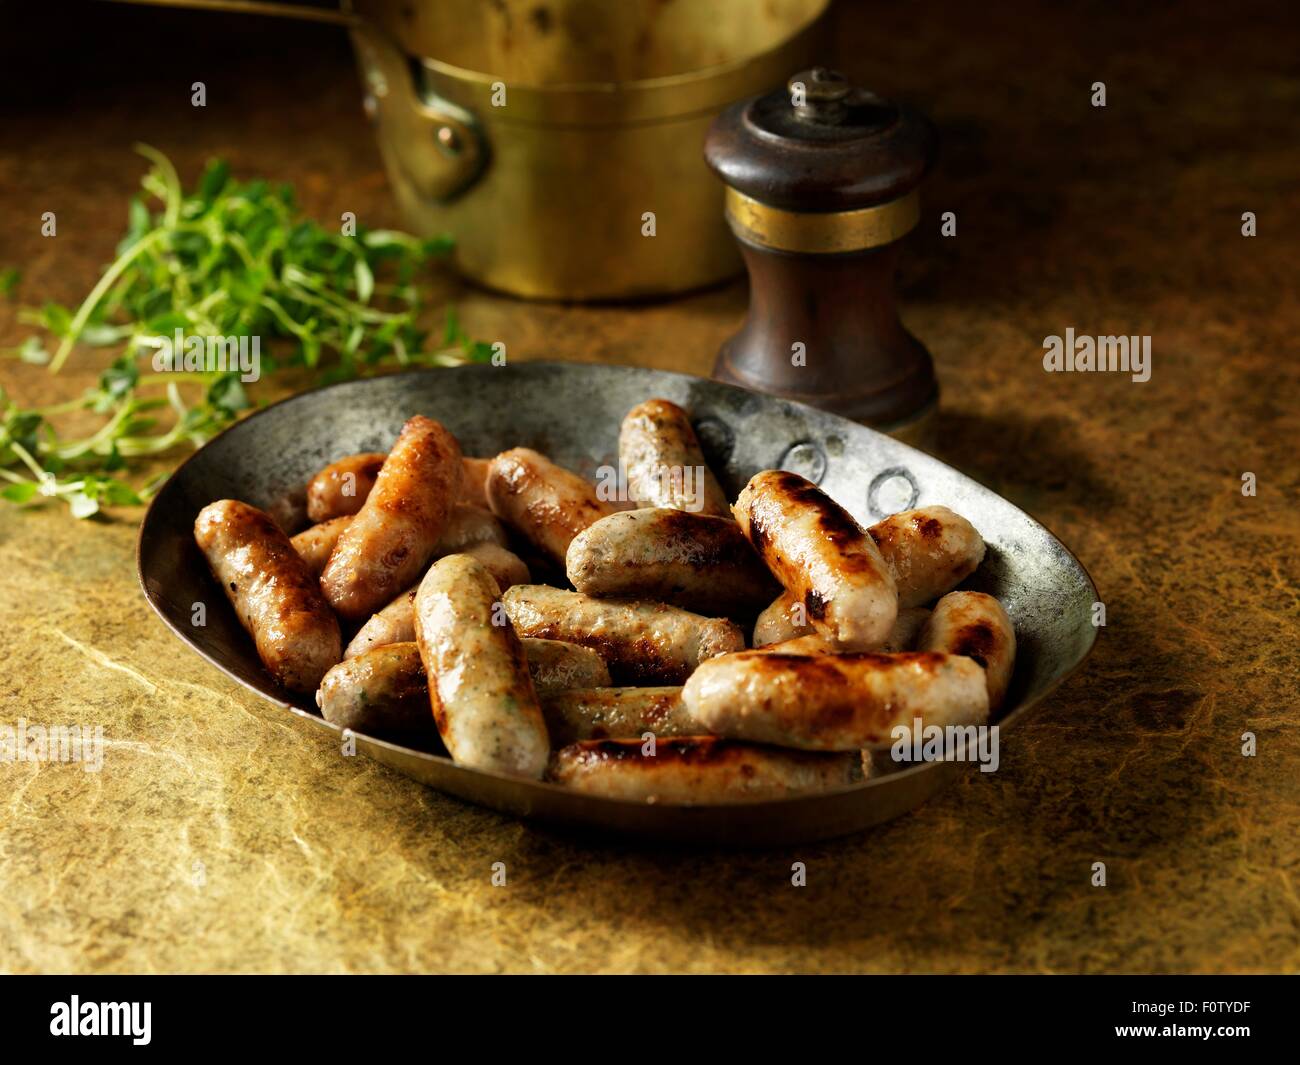 Rustic still life with cocktail sausages in metal serving dish Stock Photo